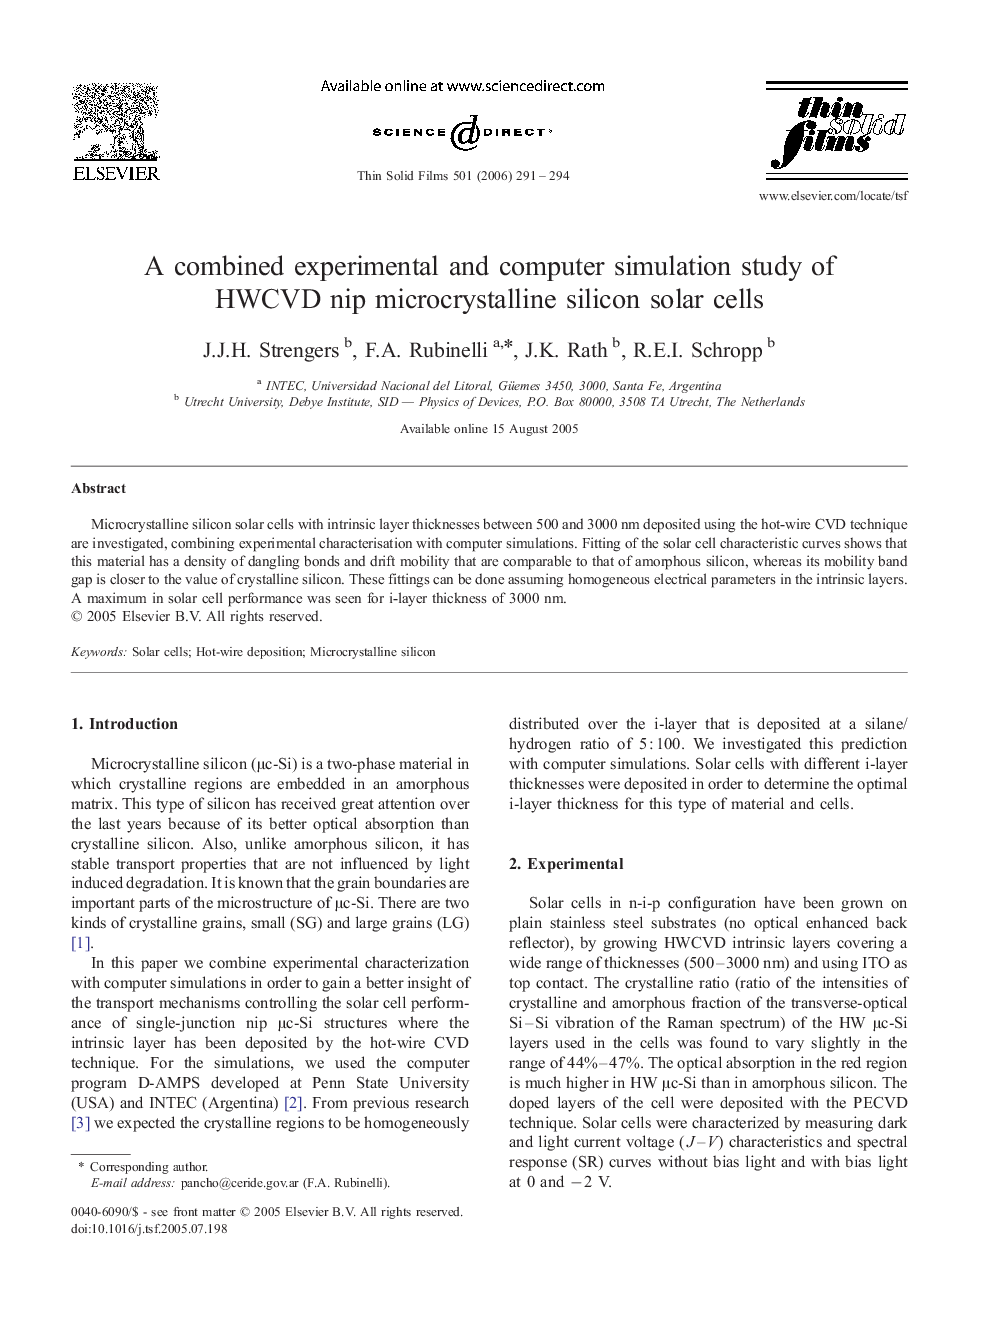 A combined experimental and computer simulation study of HWCVD nip microcrystalline silicon solar cells